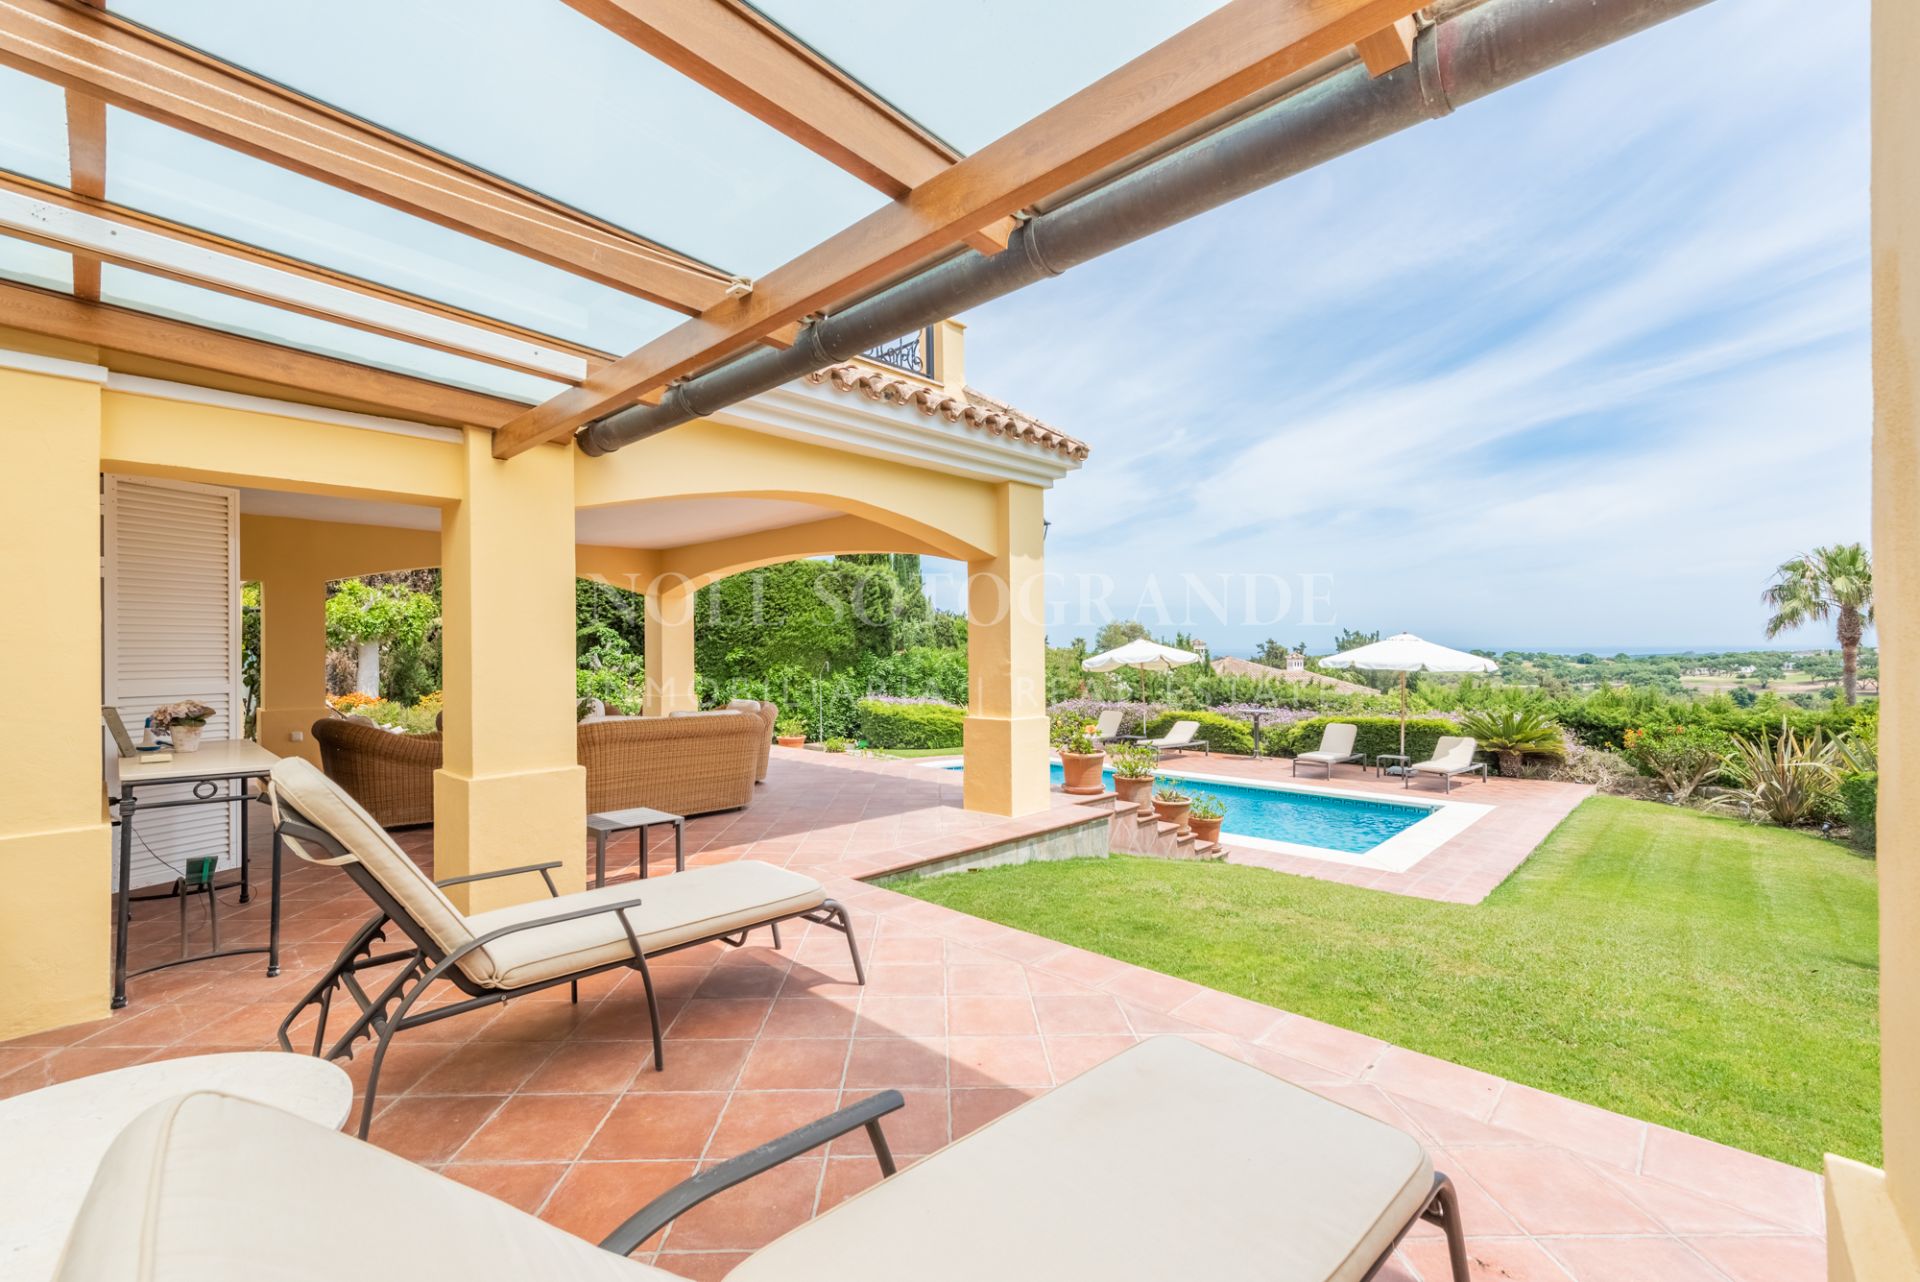 Wonderful family holiday villa for sale in Sotogrande Alto enjoying southerly sea views over the San Roque Golf Club